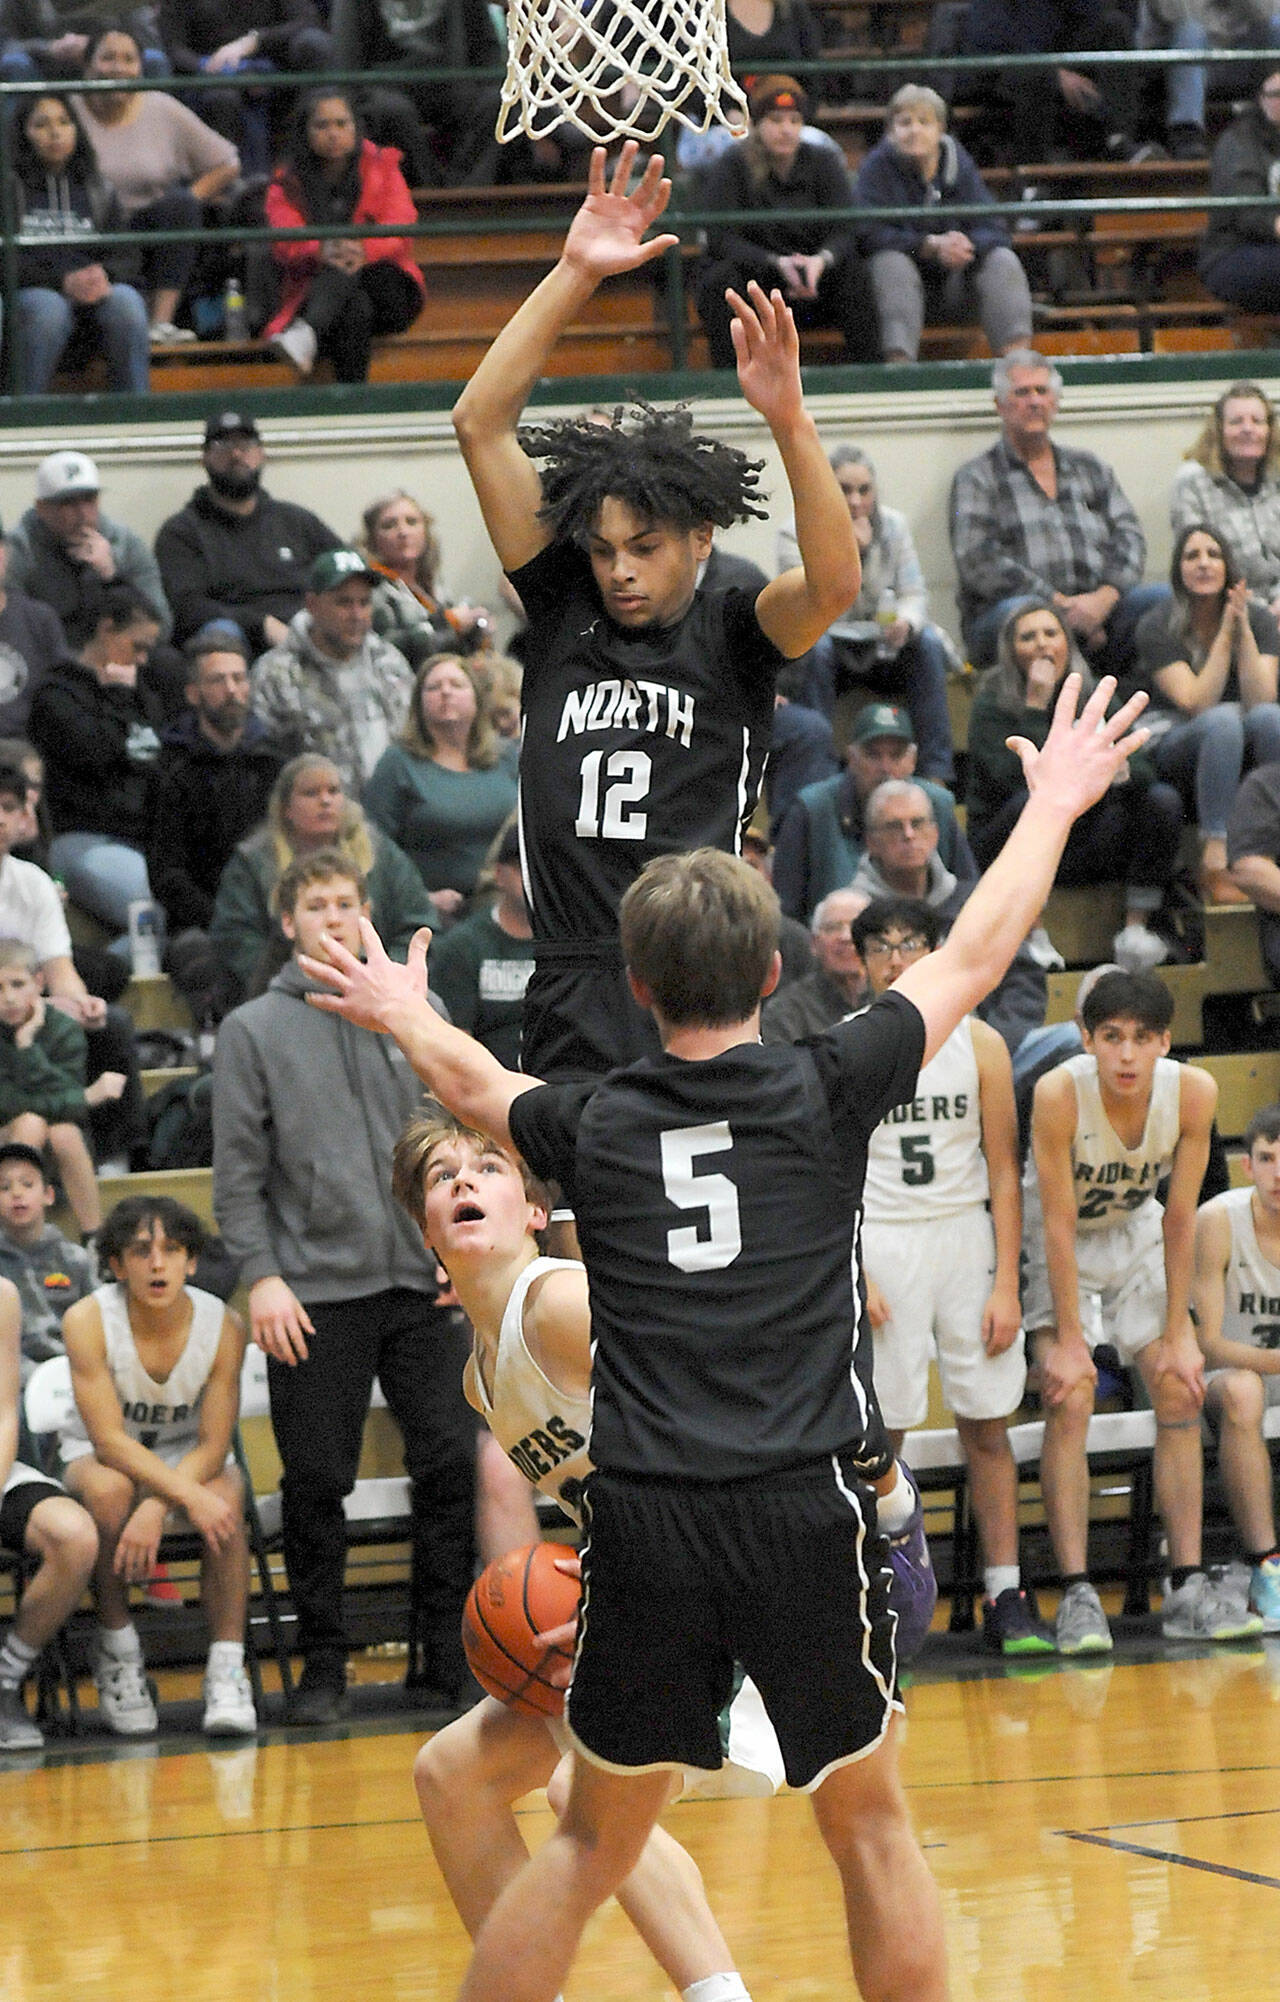 KEITH THORPE/PENINSULA DAILY NEWS Port Angeles’ Gus Halberg, left, waits for his chance at the basket as North Kitsap’s Harry Davies, top, and Ethan Gillespie provide interference on Thursday at Port Angeles High School.